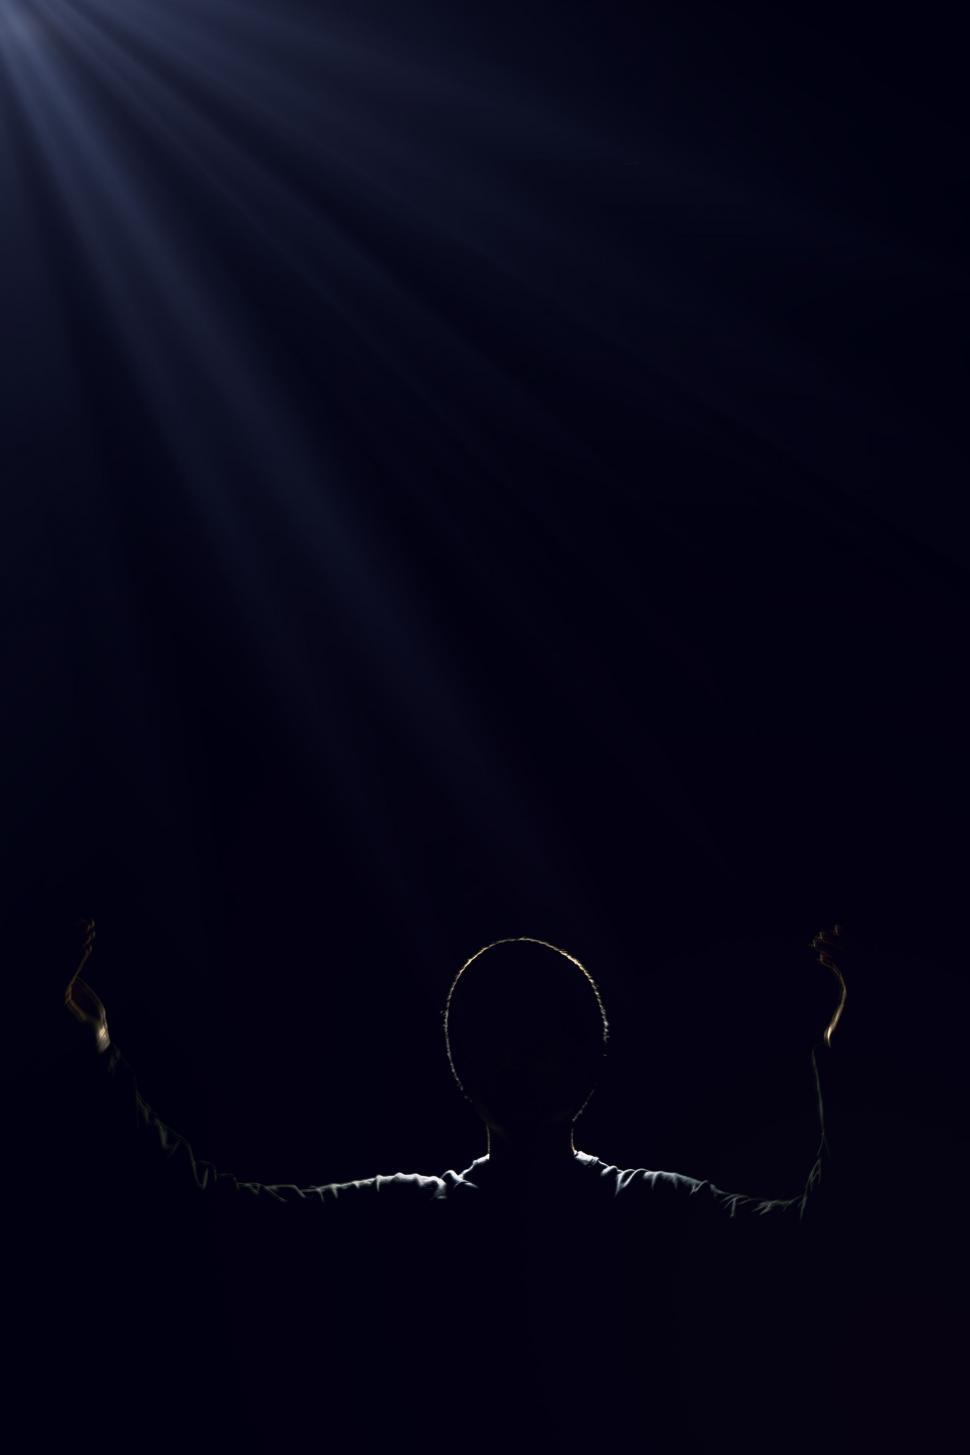 Free Image of Person Standing in the Dark With Arms Raised 